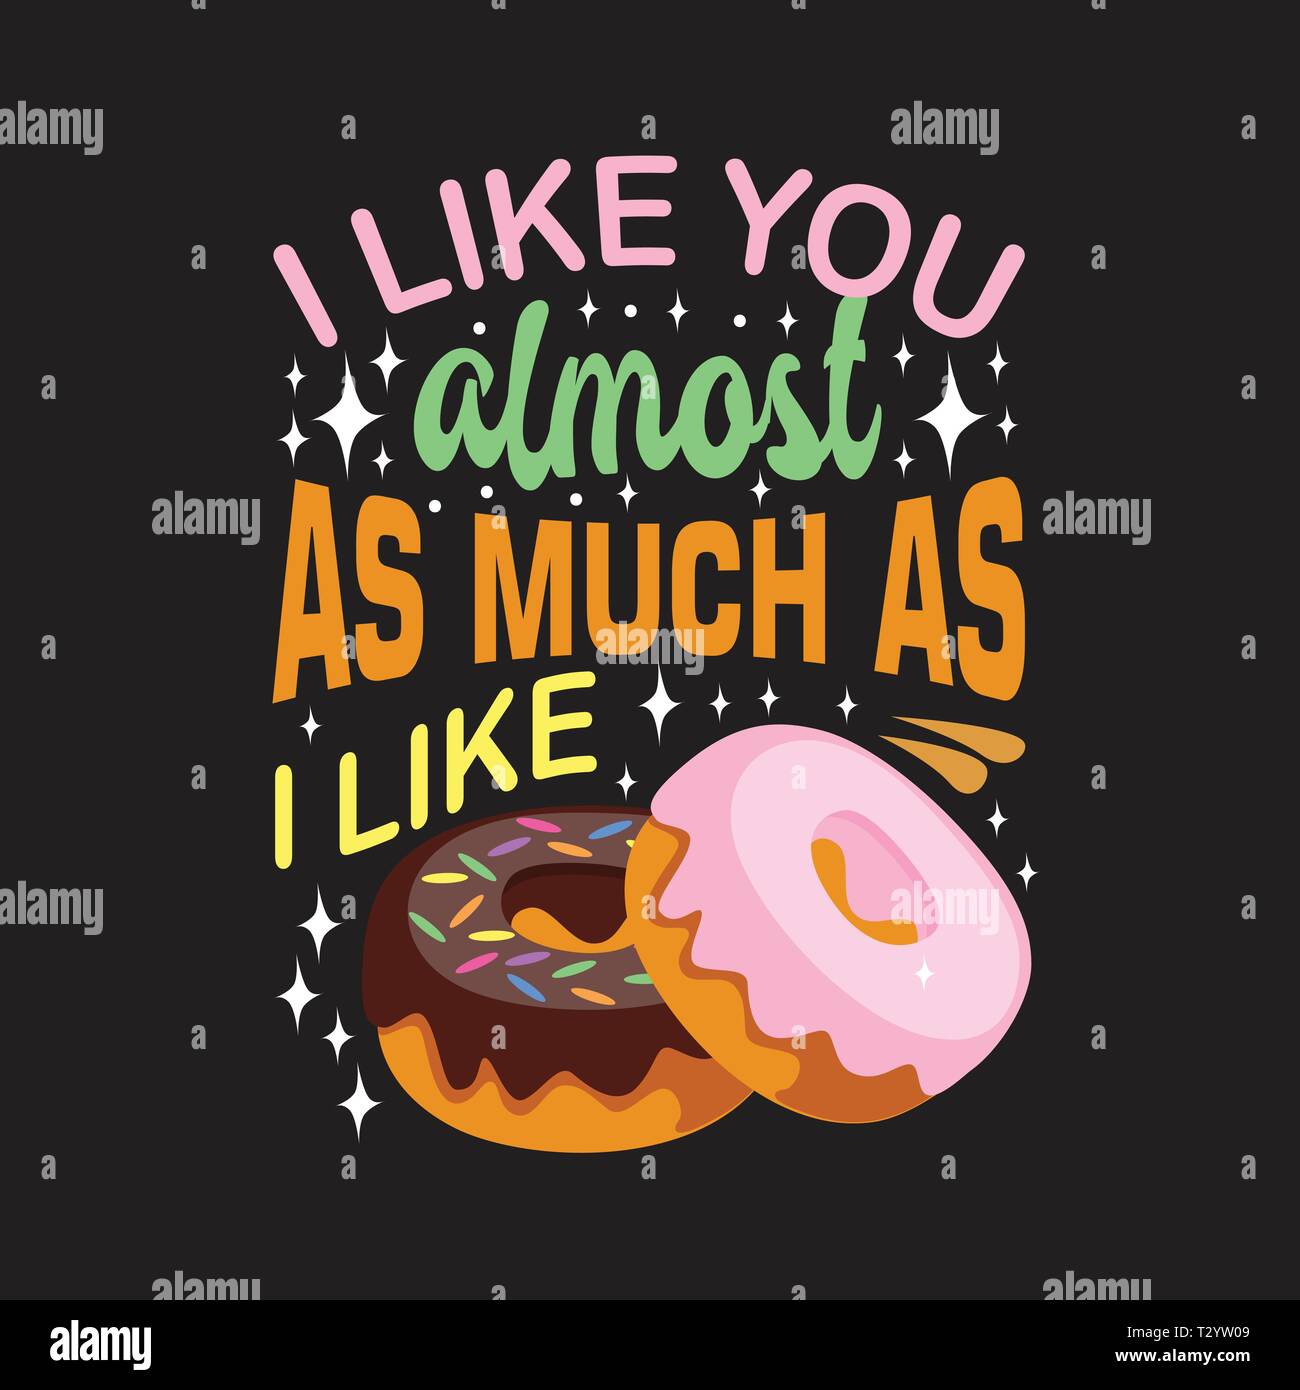 Donuts Quote. I like you almost as much as I like. Stock Vector